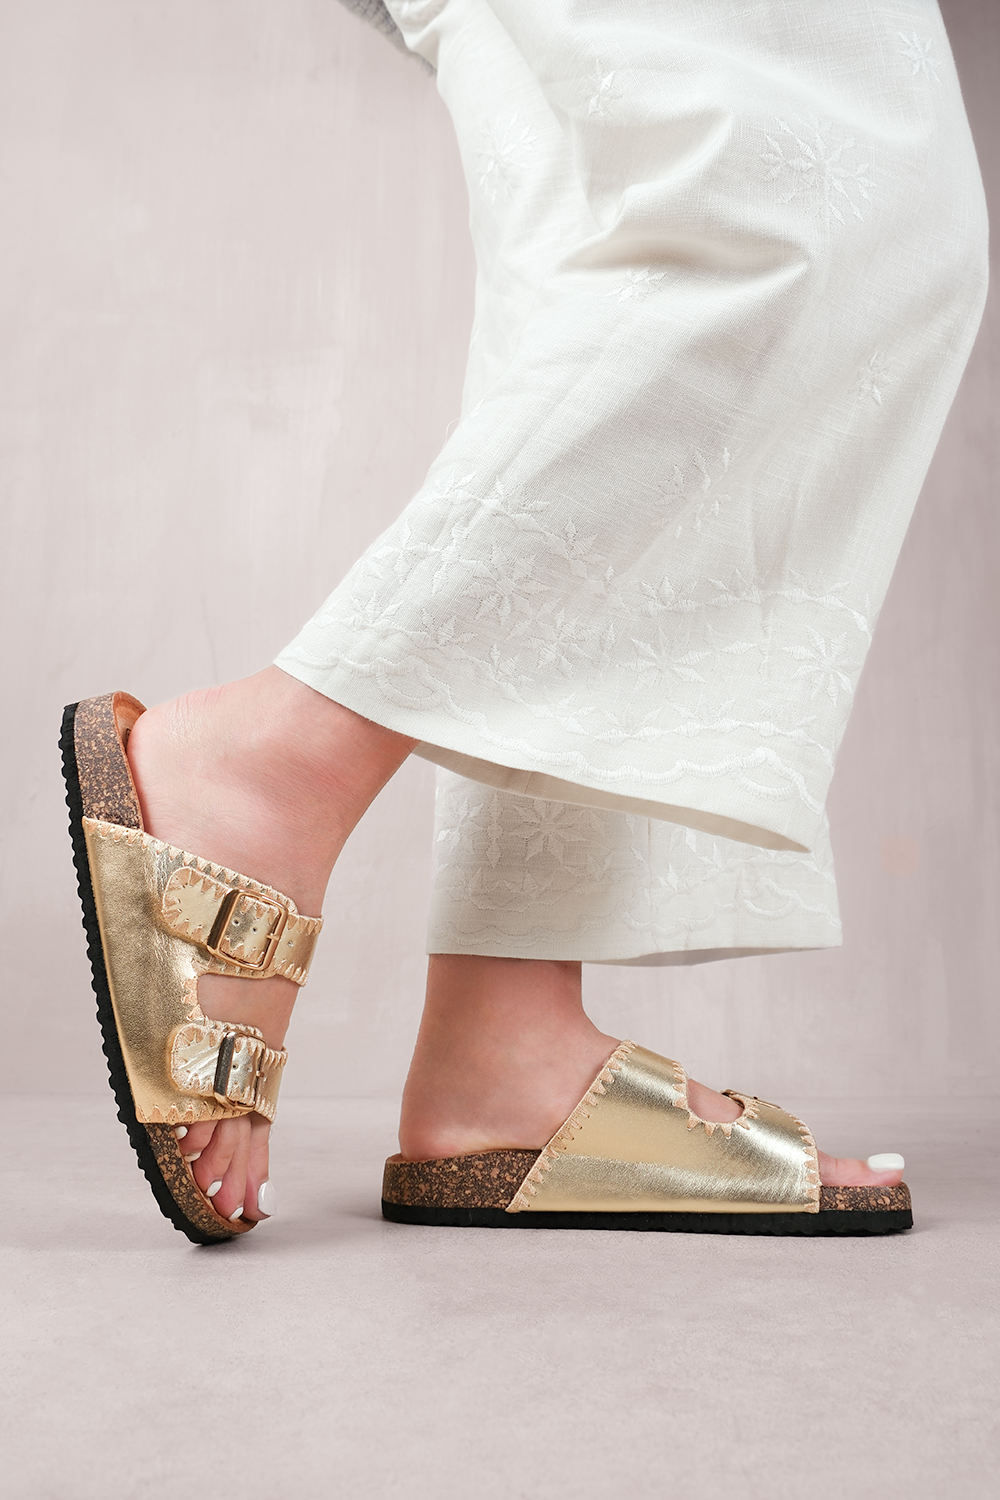 SUNSET DOUBLE STRAP FLAT SANDALS WITH BUCKLE DETAIL IN GOLD METALLIC